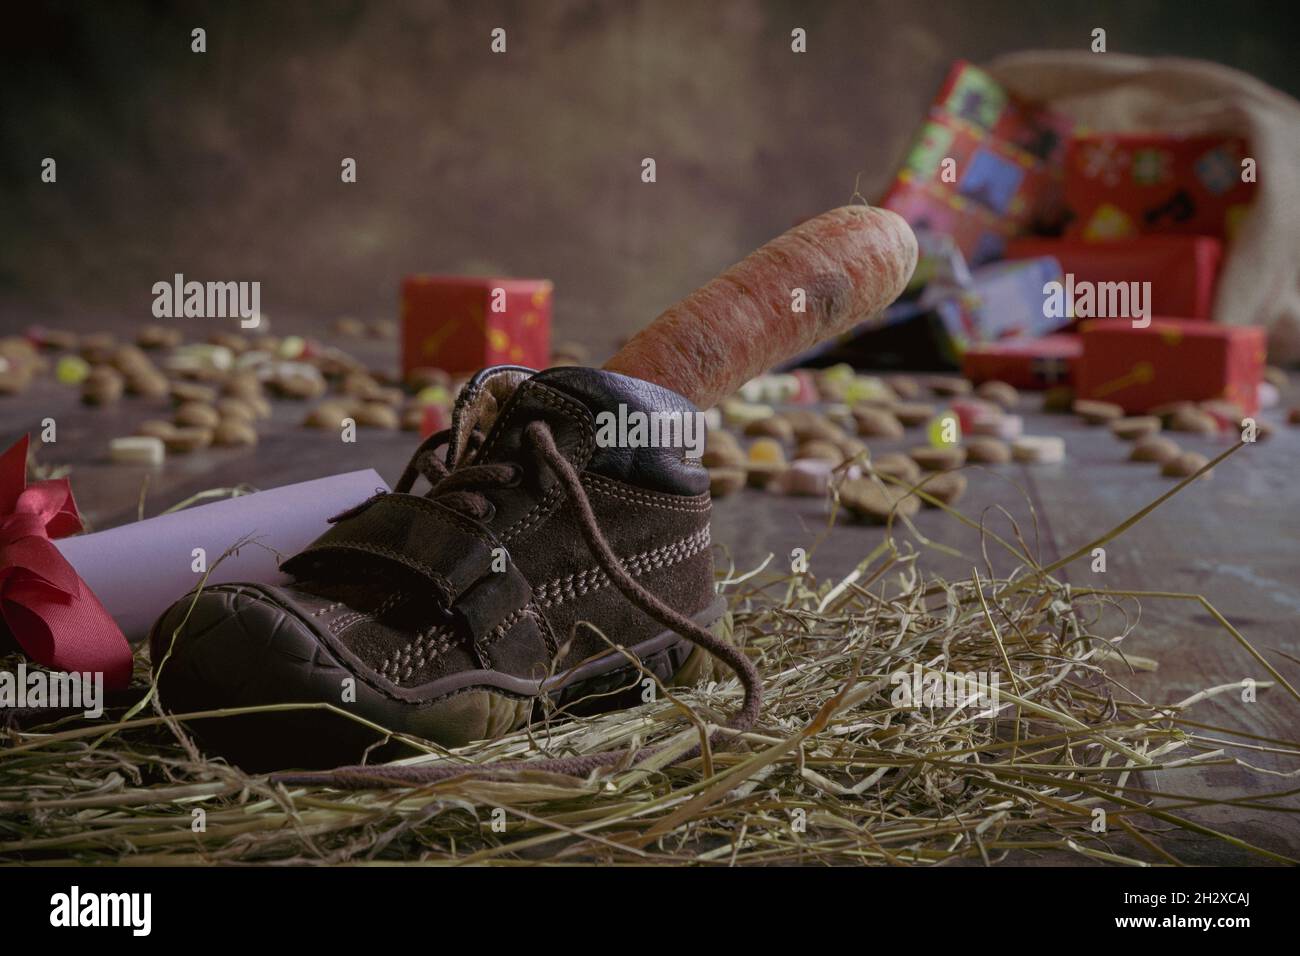 A kid places his shoe with carrots for Amerigo, the horse of Sinterklaas and a drawing for Sinterklaas, Then he dreams of a bag full of presents and c Stock Photo